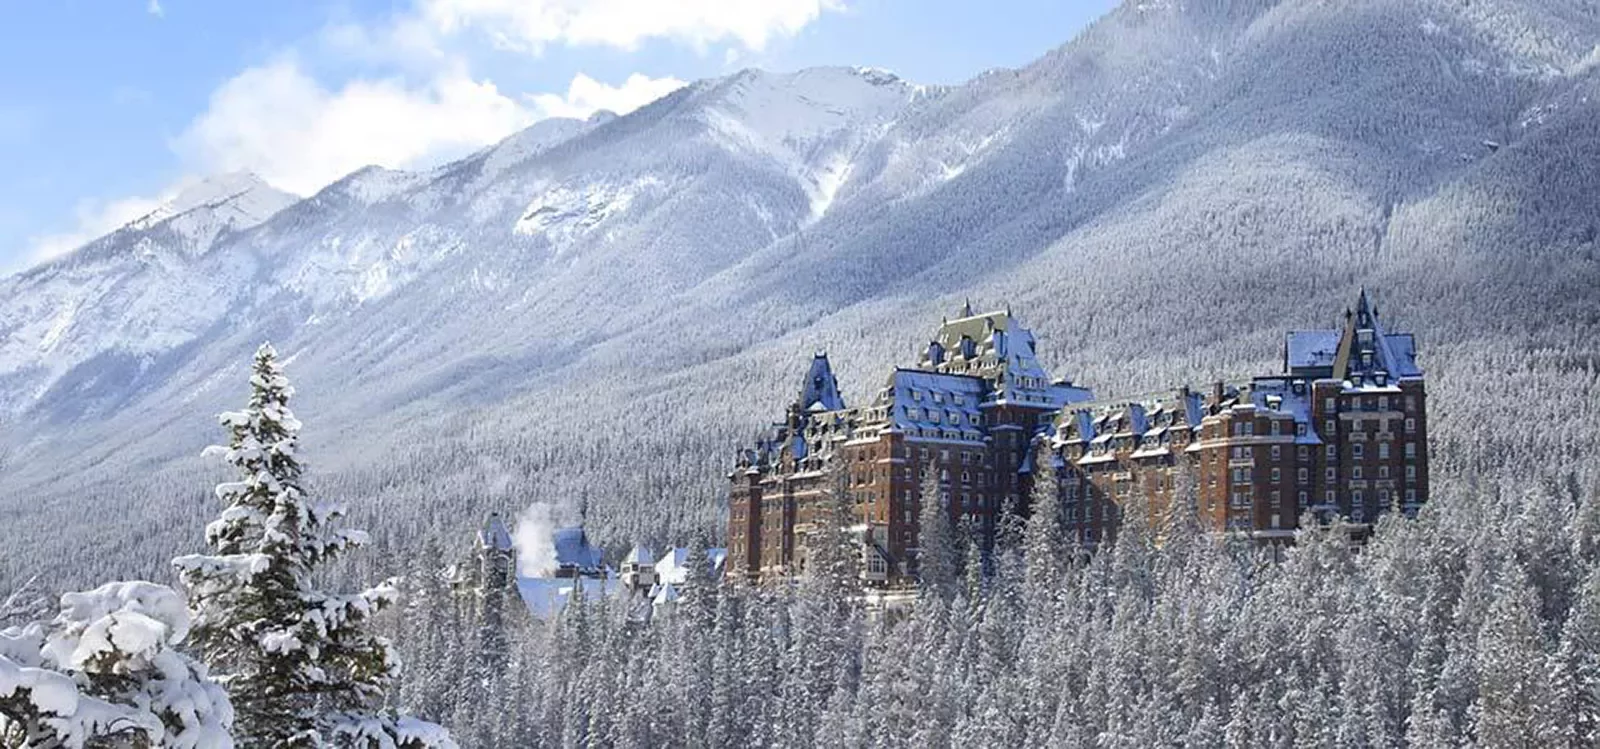 Wide shot of the Fairmont Banff Springs.